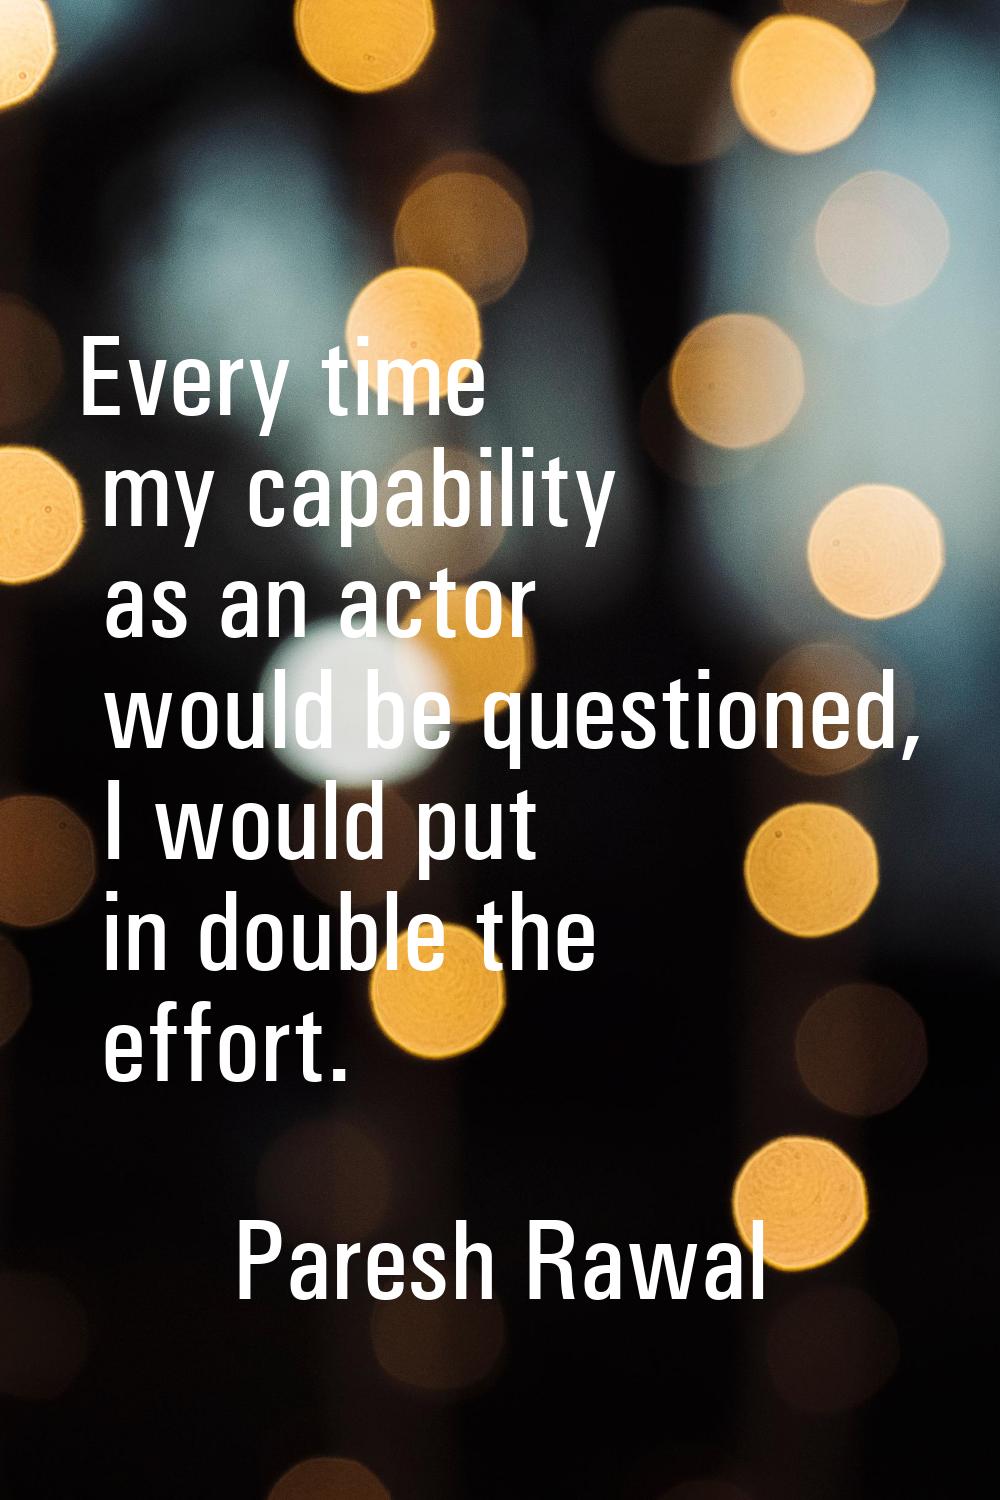 Every time my capability as an actor would be questioned, I would put in double the effort.